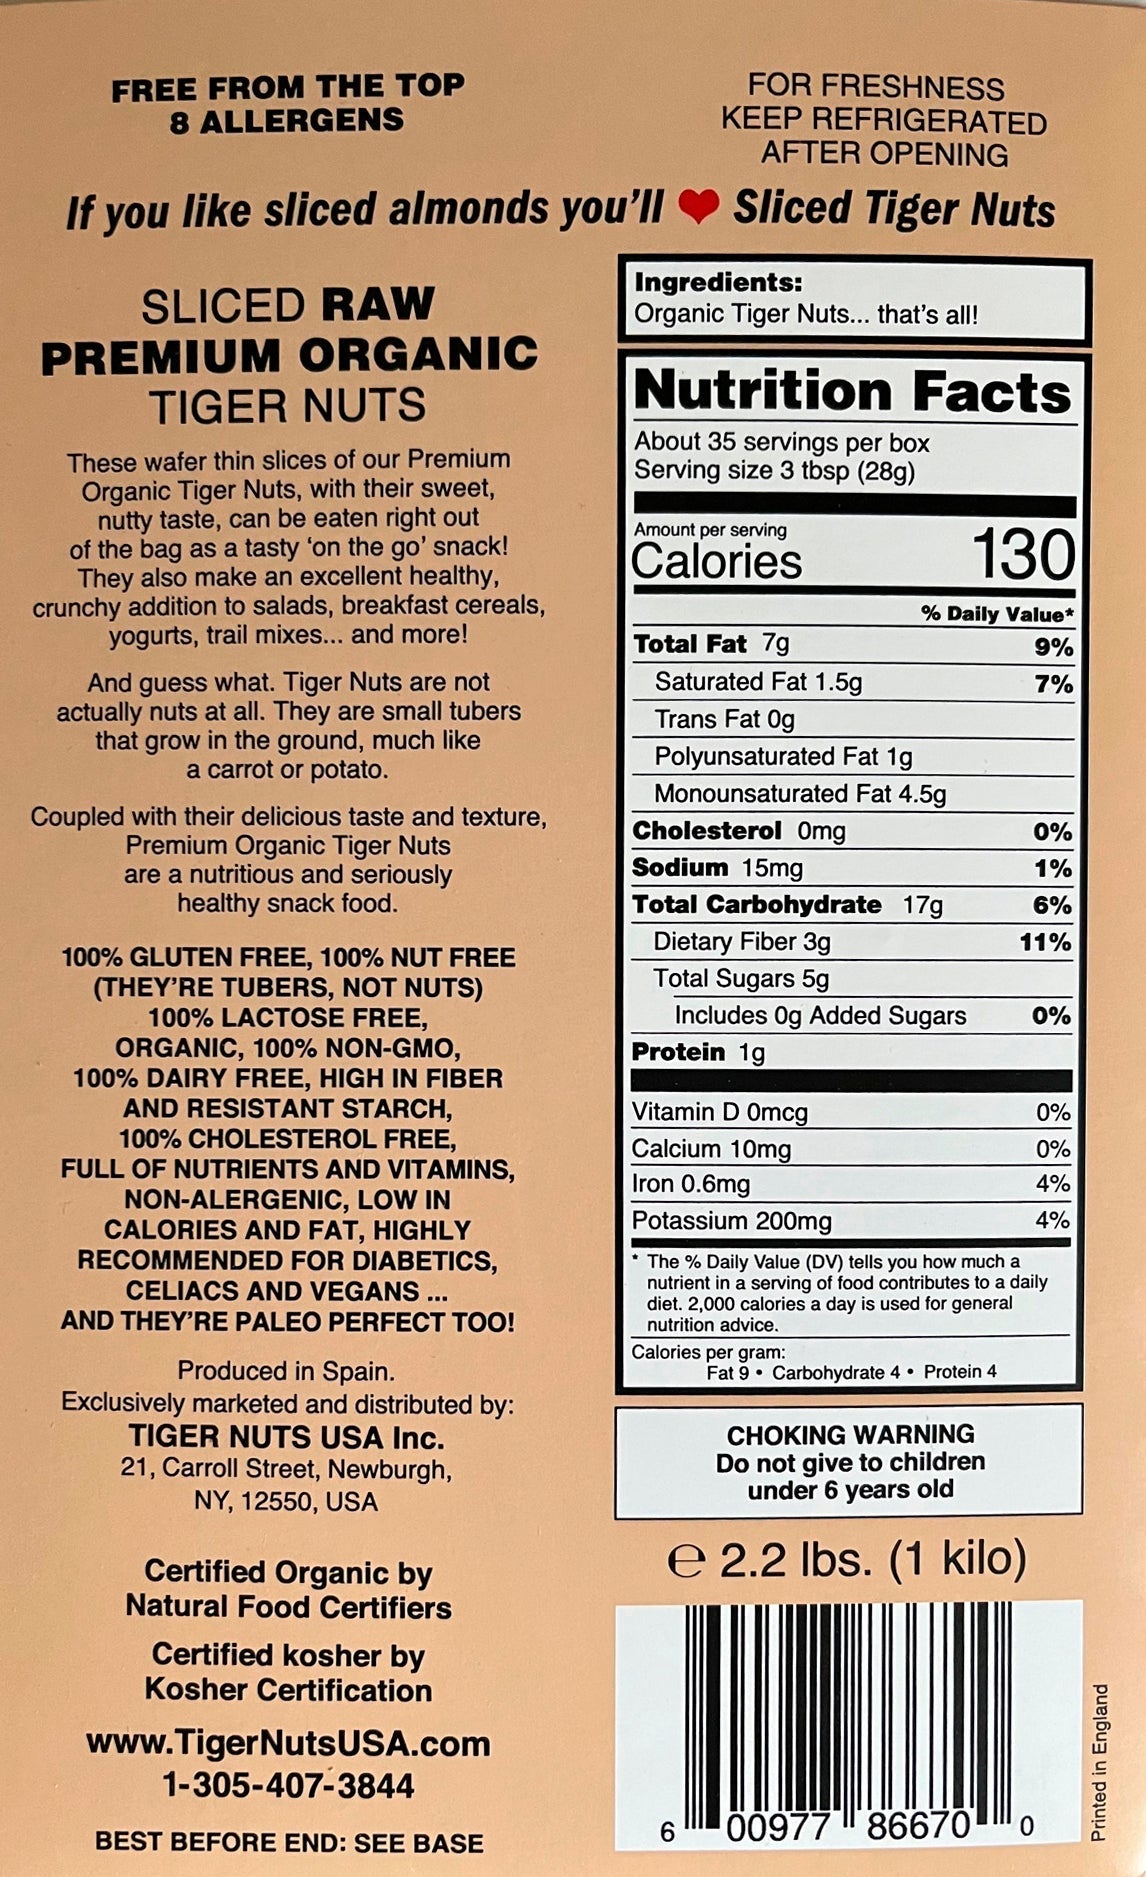 Tiger Nuts Sliced Tiger Nuts in Kilo (2.2 lbs) bag - 10 bags by Farm2Me